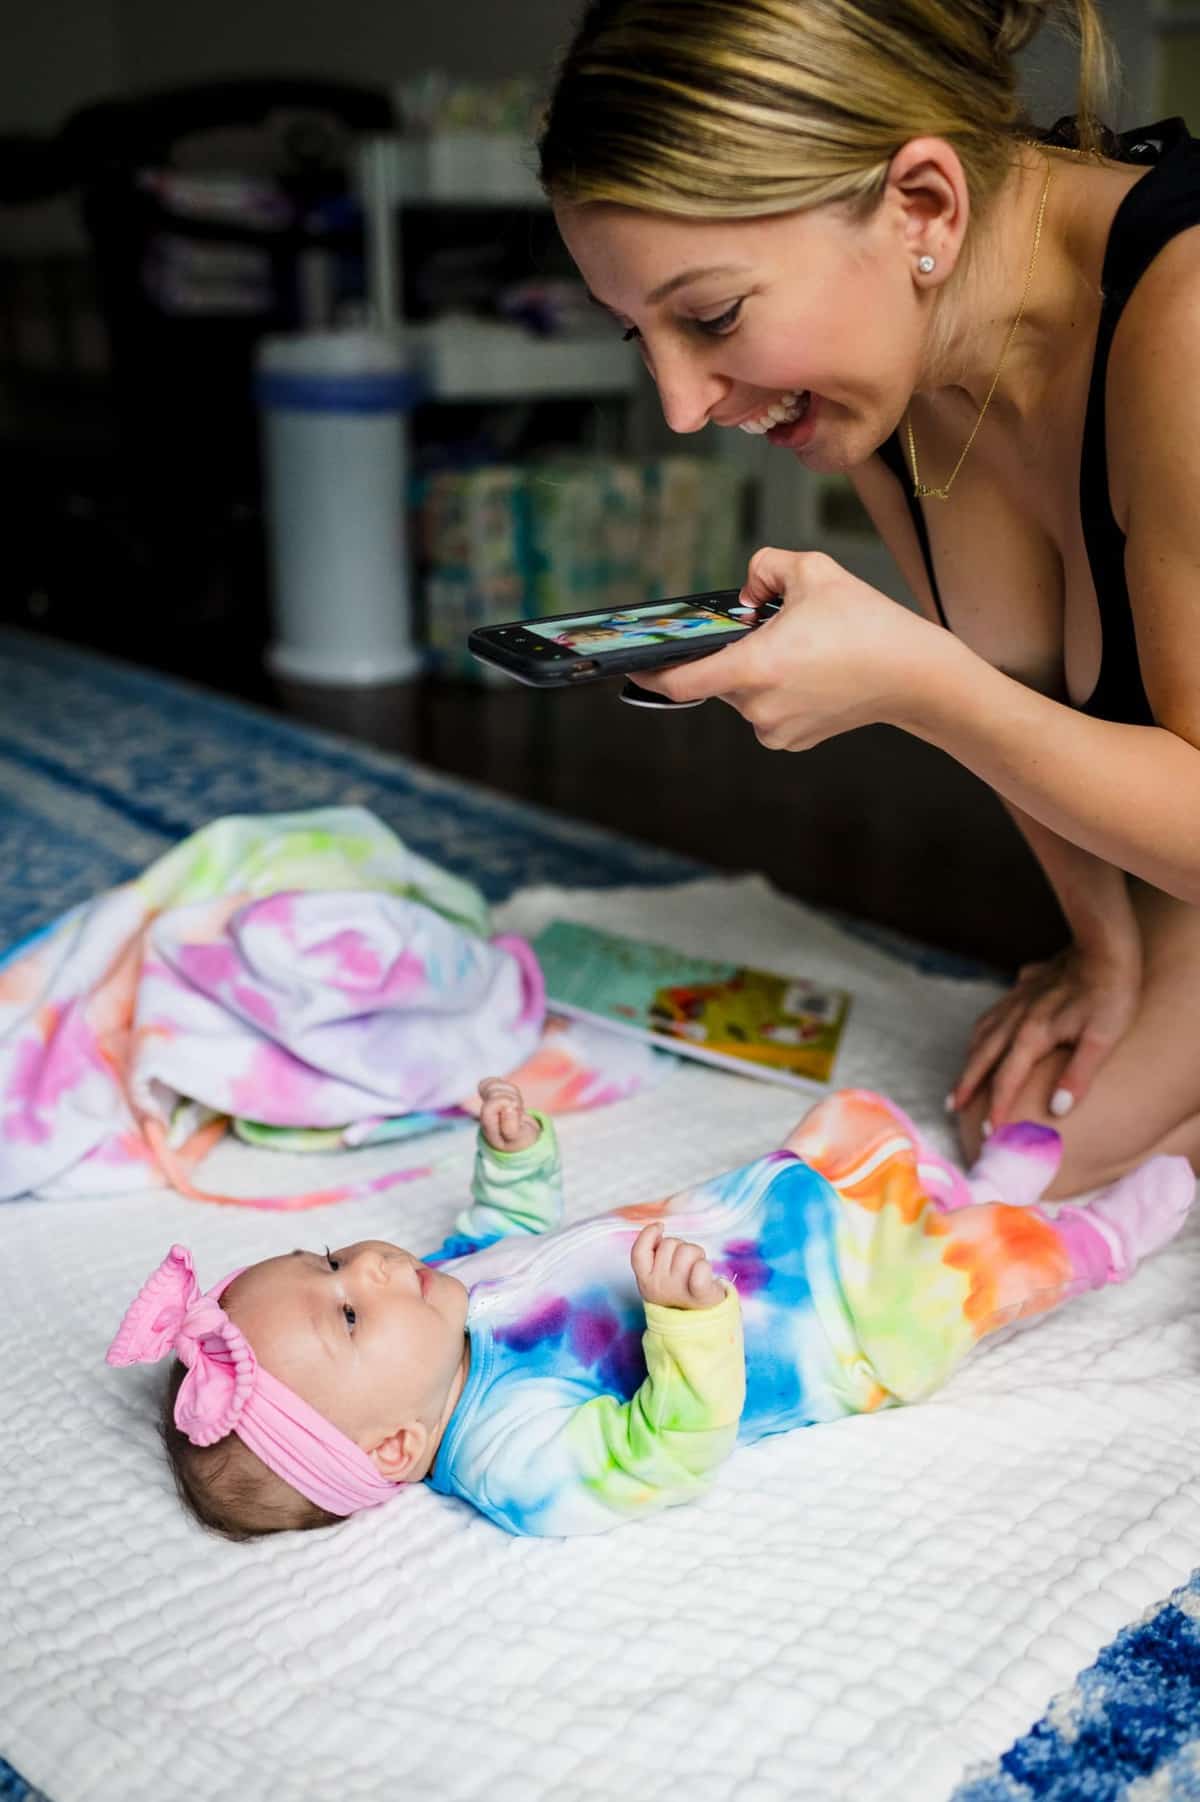 Woman taking photo of her baby on cell phone